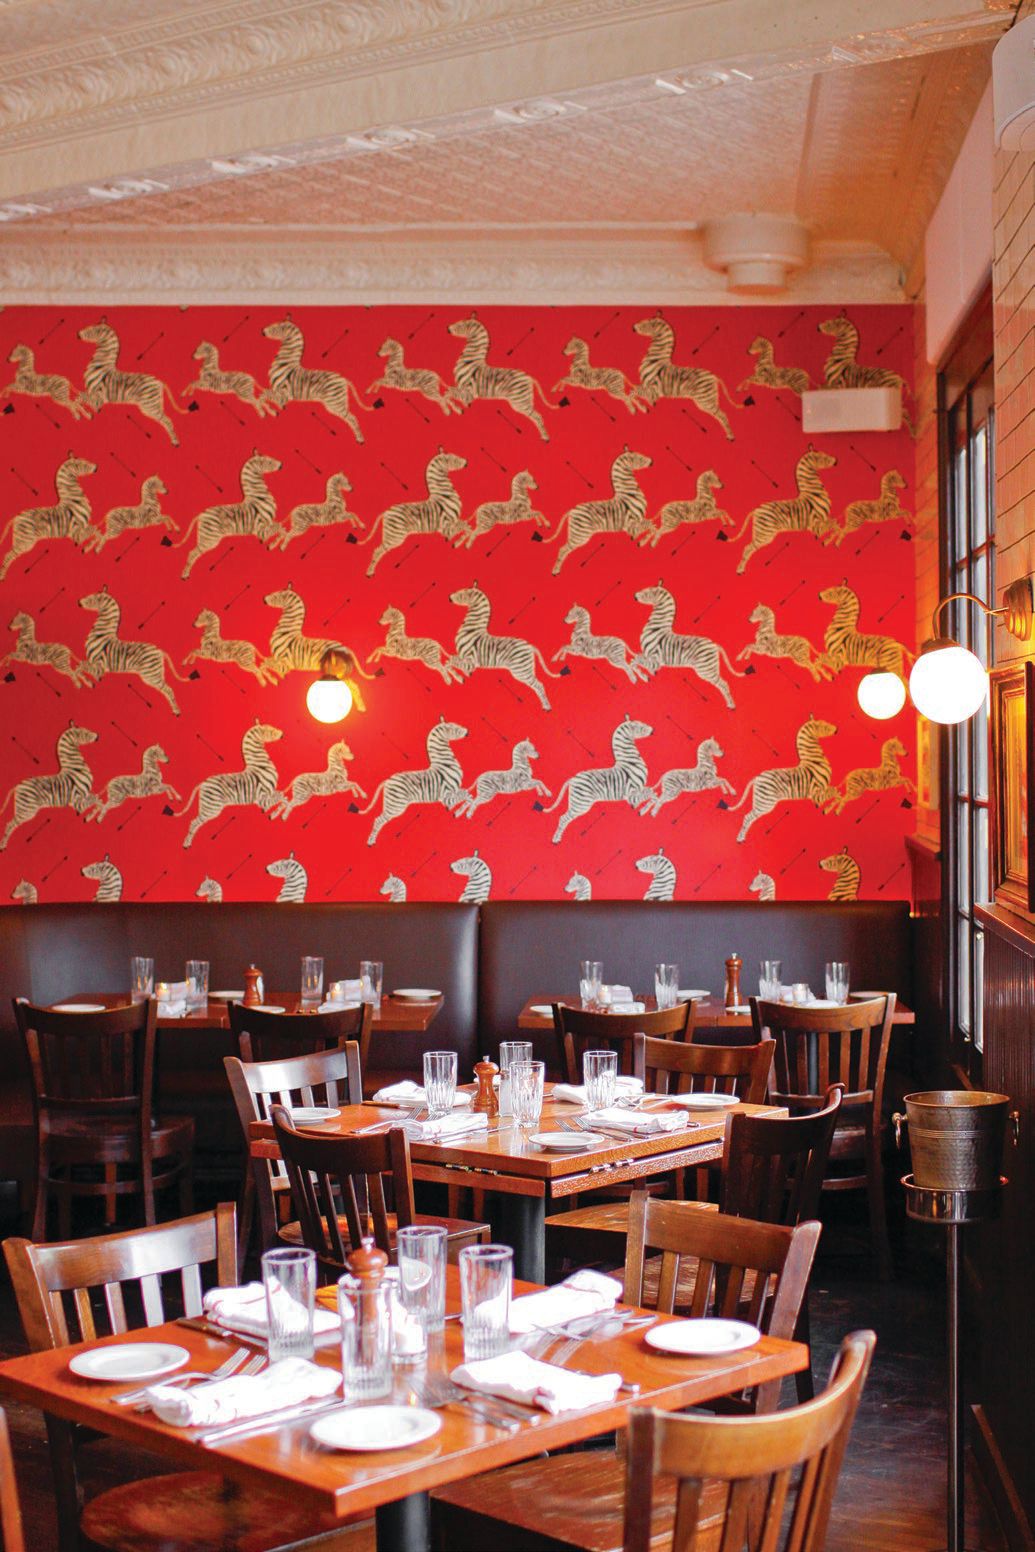 Almond’s dining room ALMOND PHOTO BY ERIC STRIFFLER